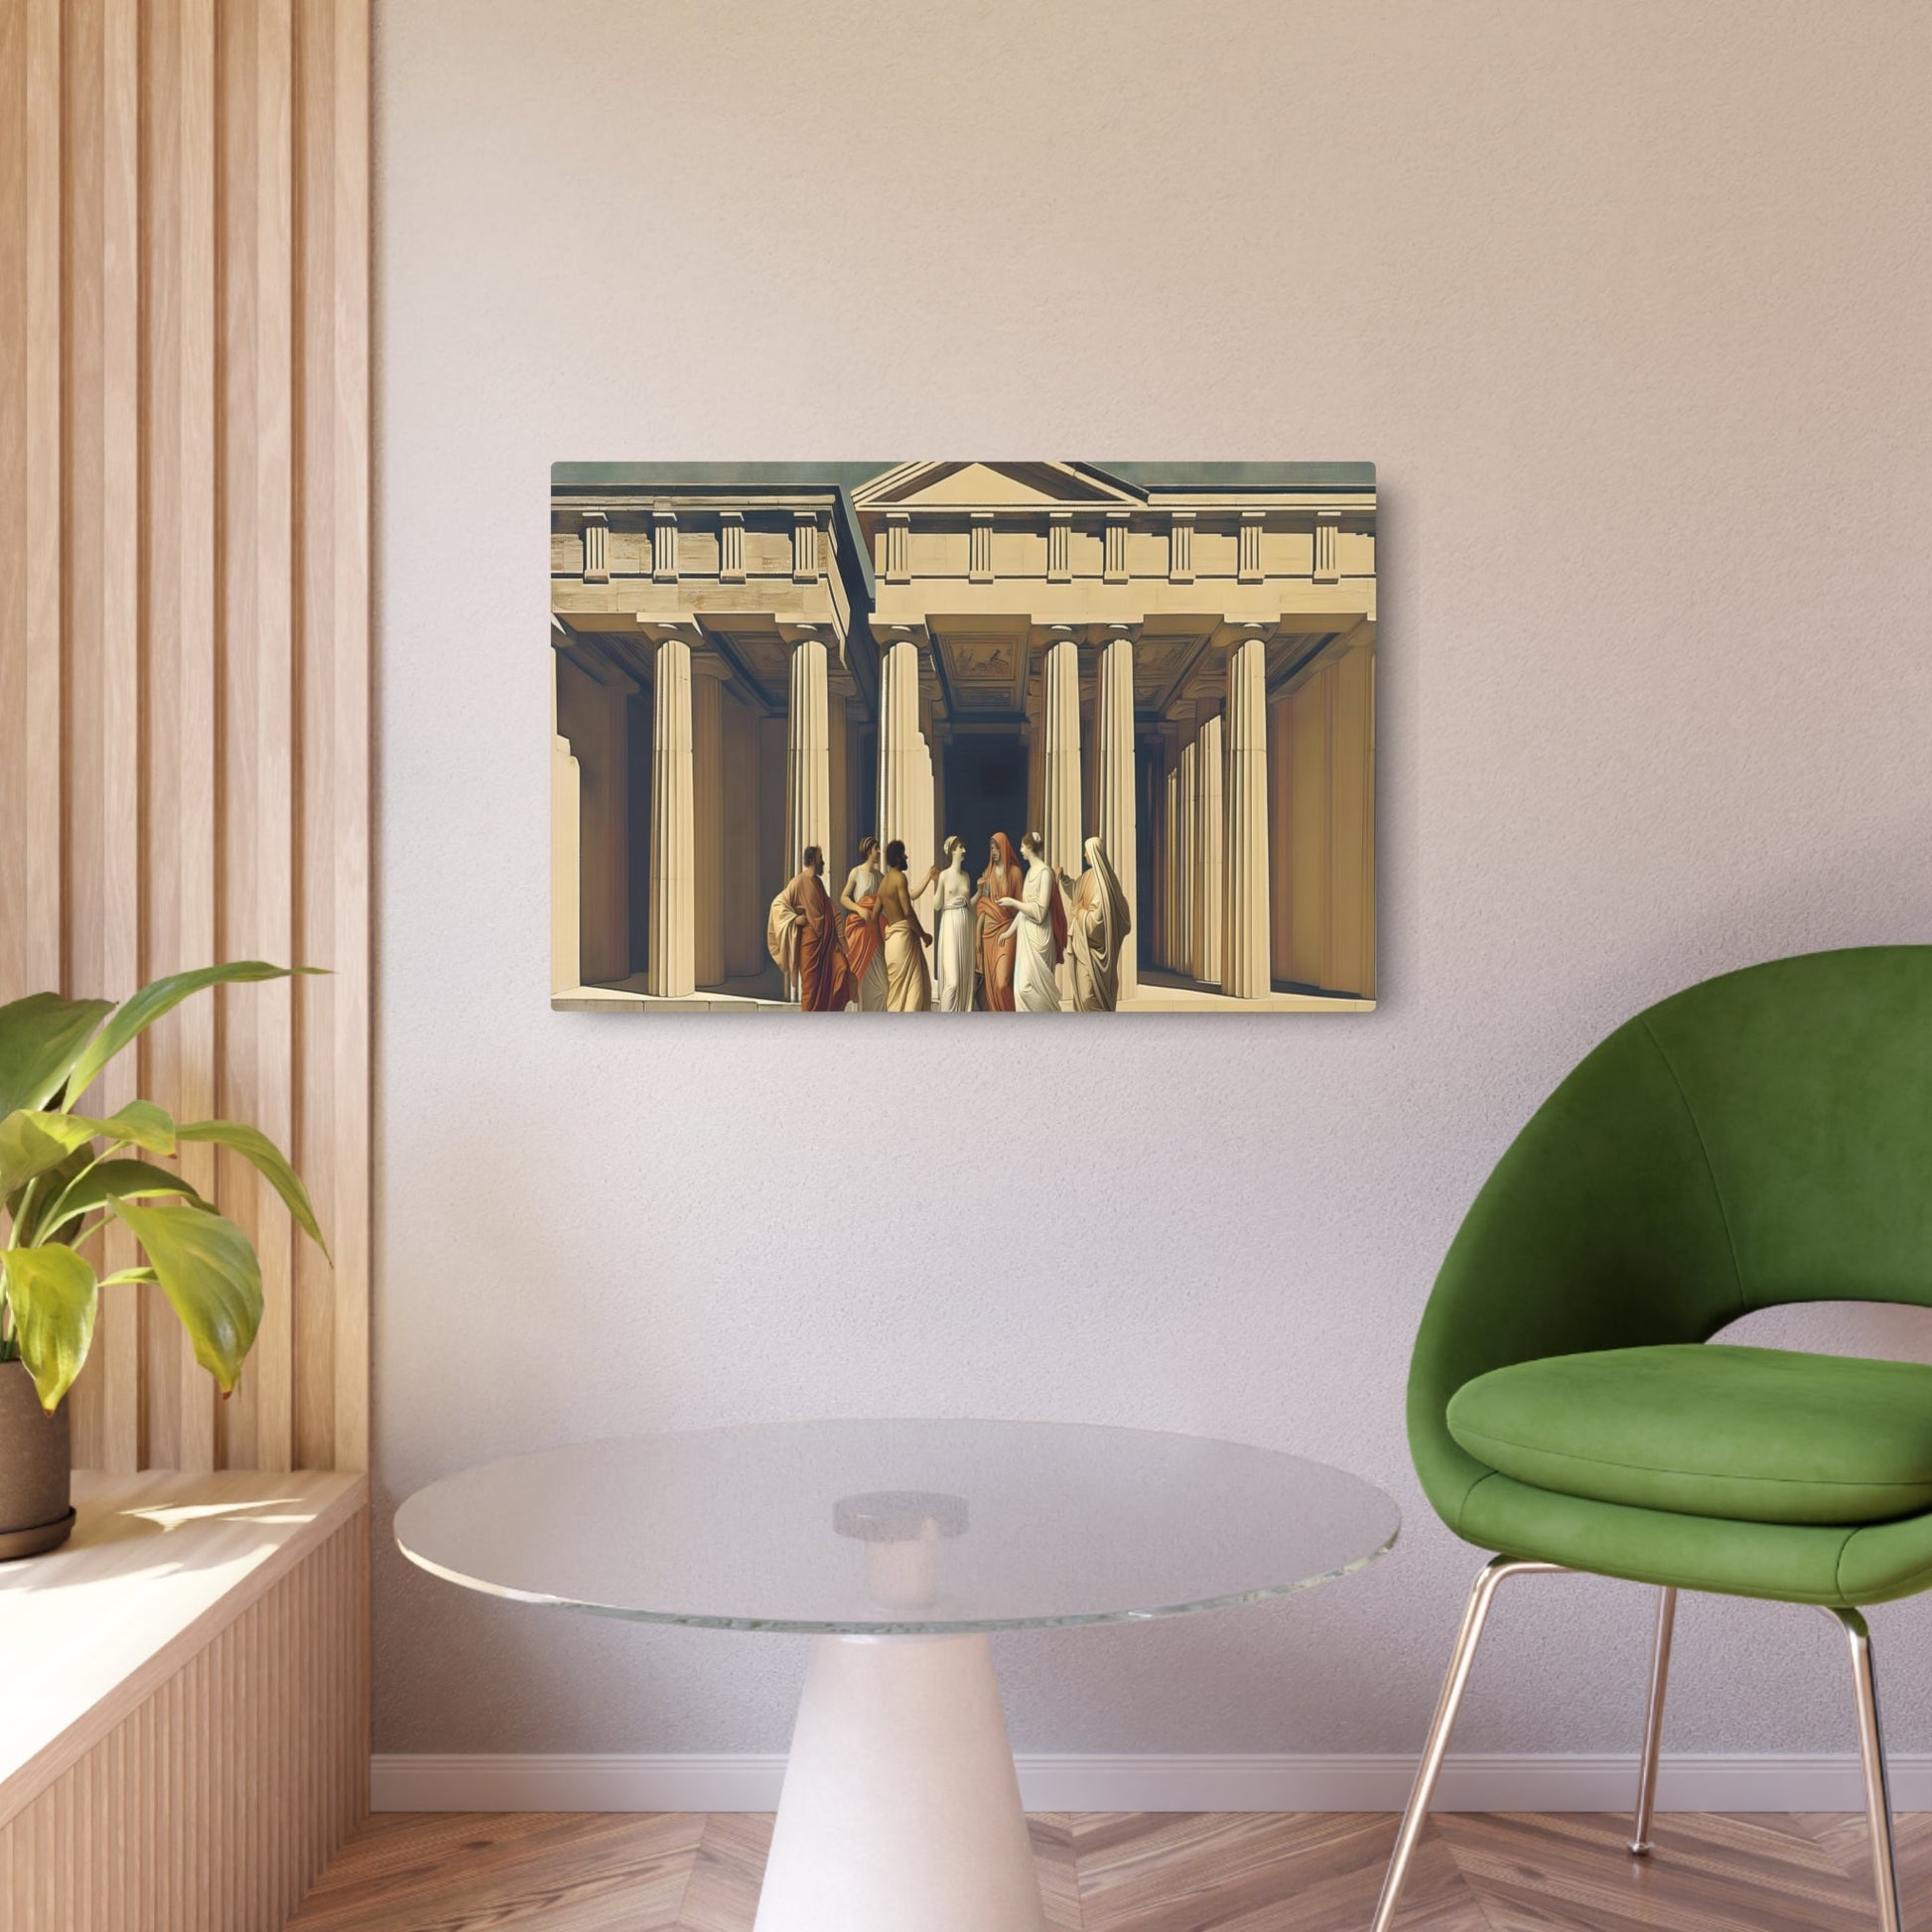 Metal Poster Art | "Neoclassical Artwork with Greco-Roman Architecture & Robed Figures in Earthy Tones - Western Art Styles Collection" - Metal Poster Art 36″ x 24″ (Horizontal) 0.12''